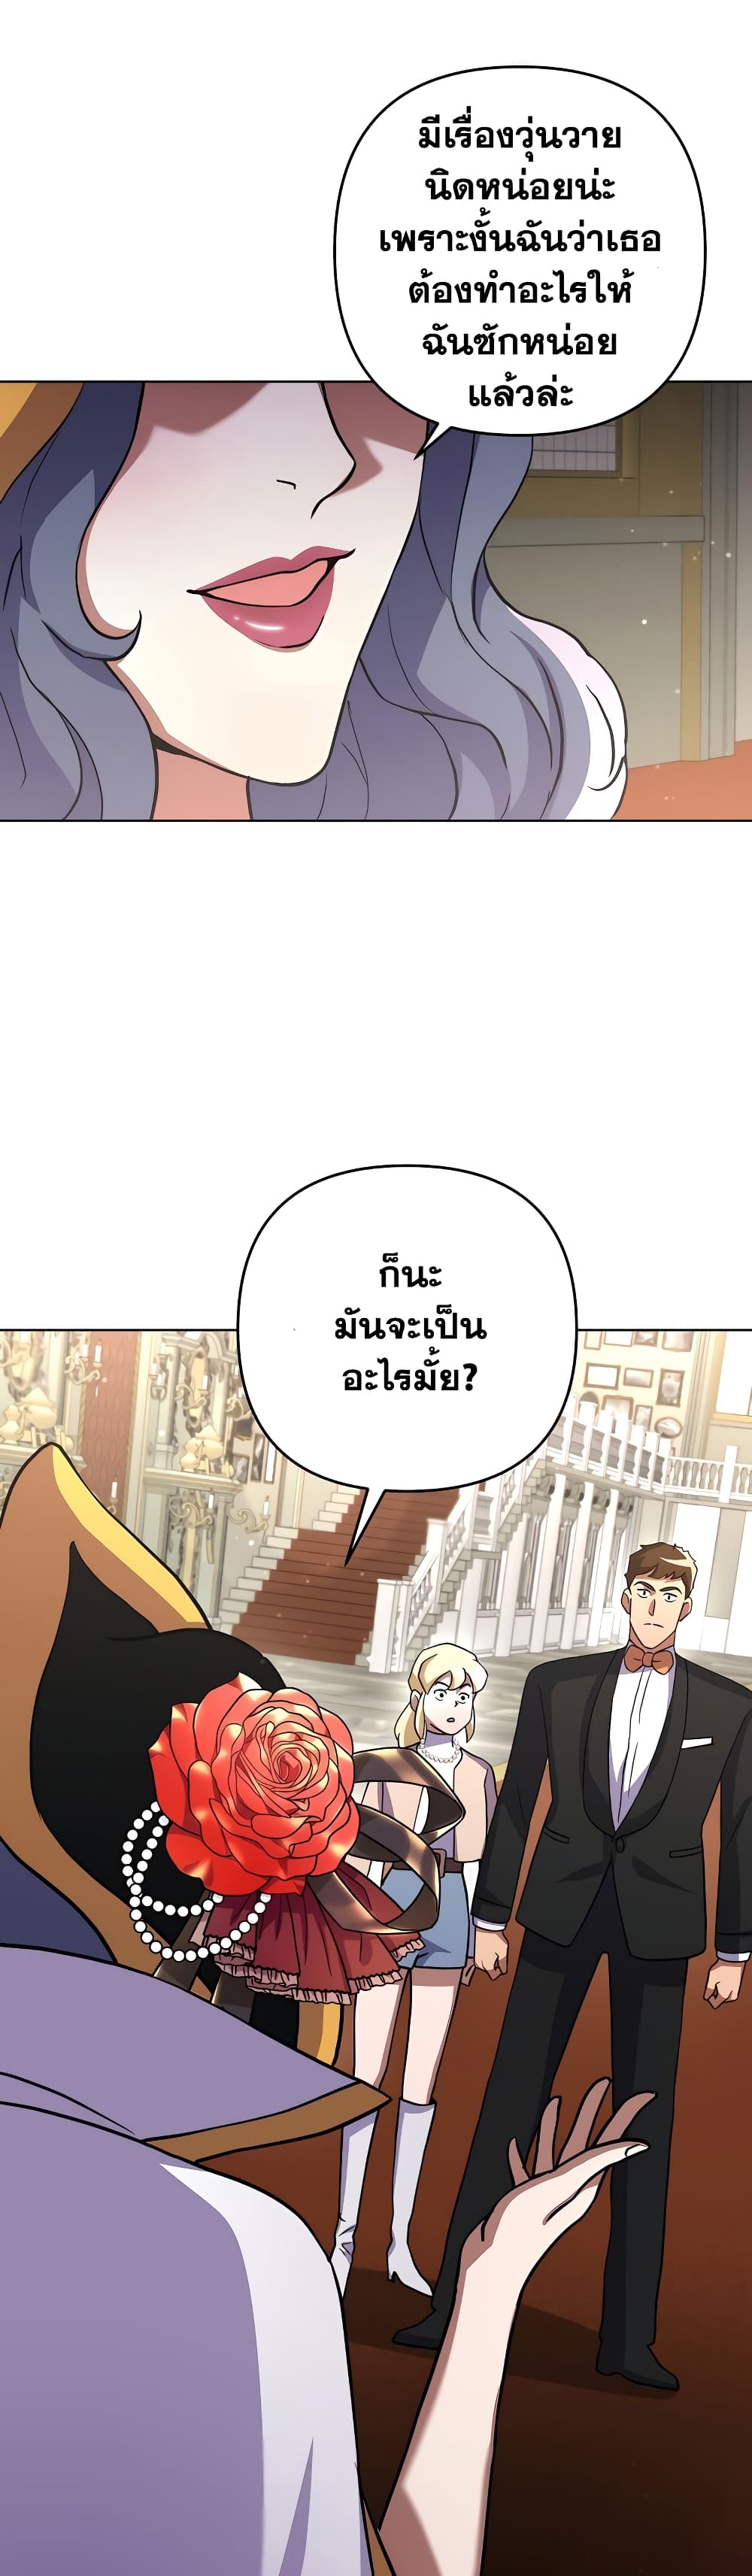 Surviving in an Action Manhwa 14-14